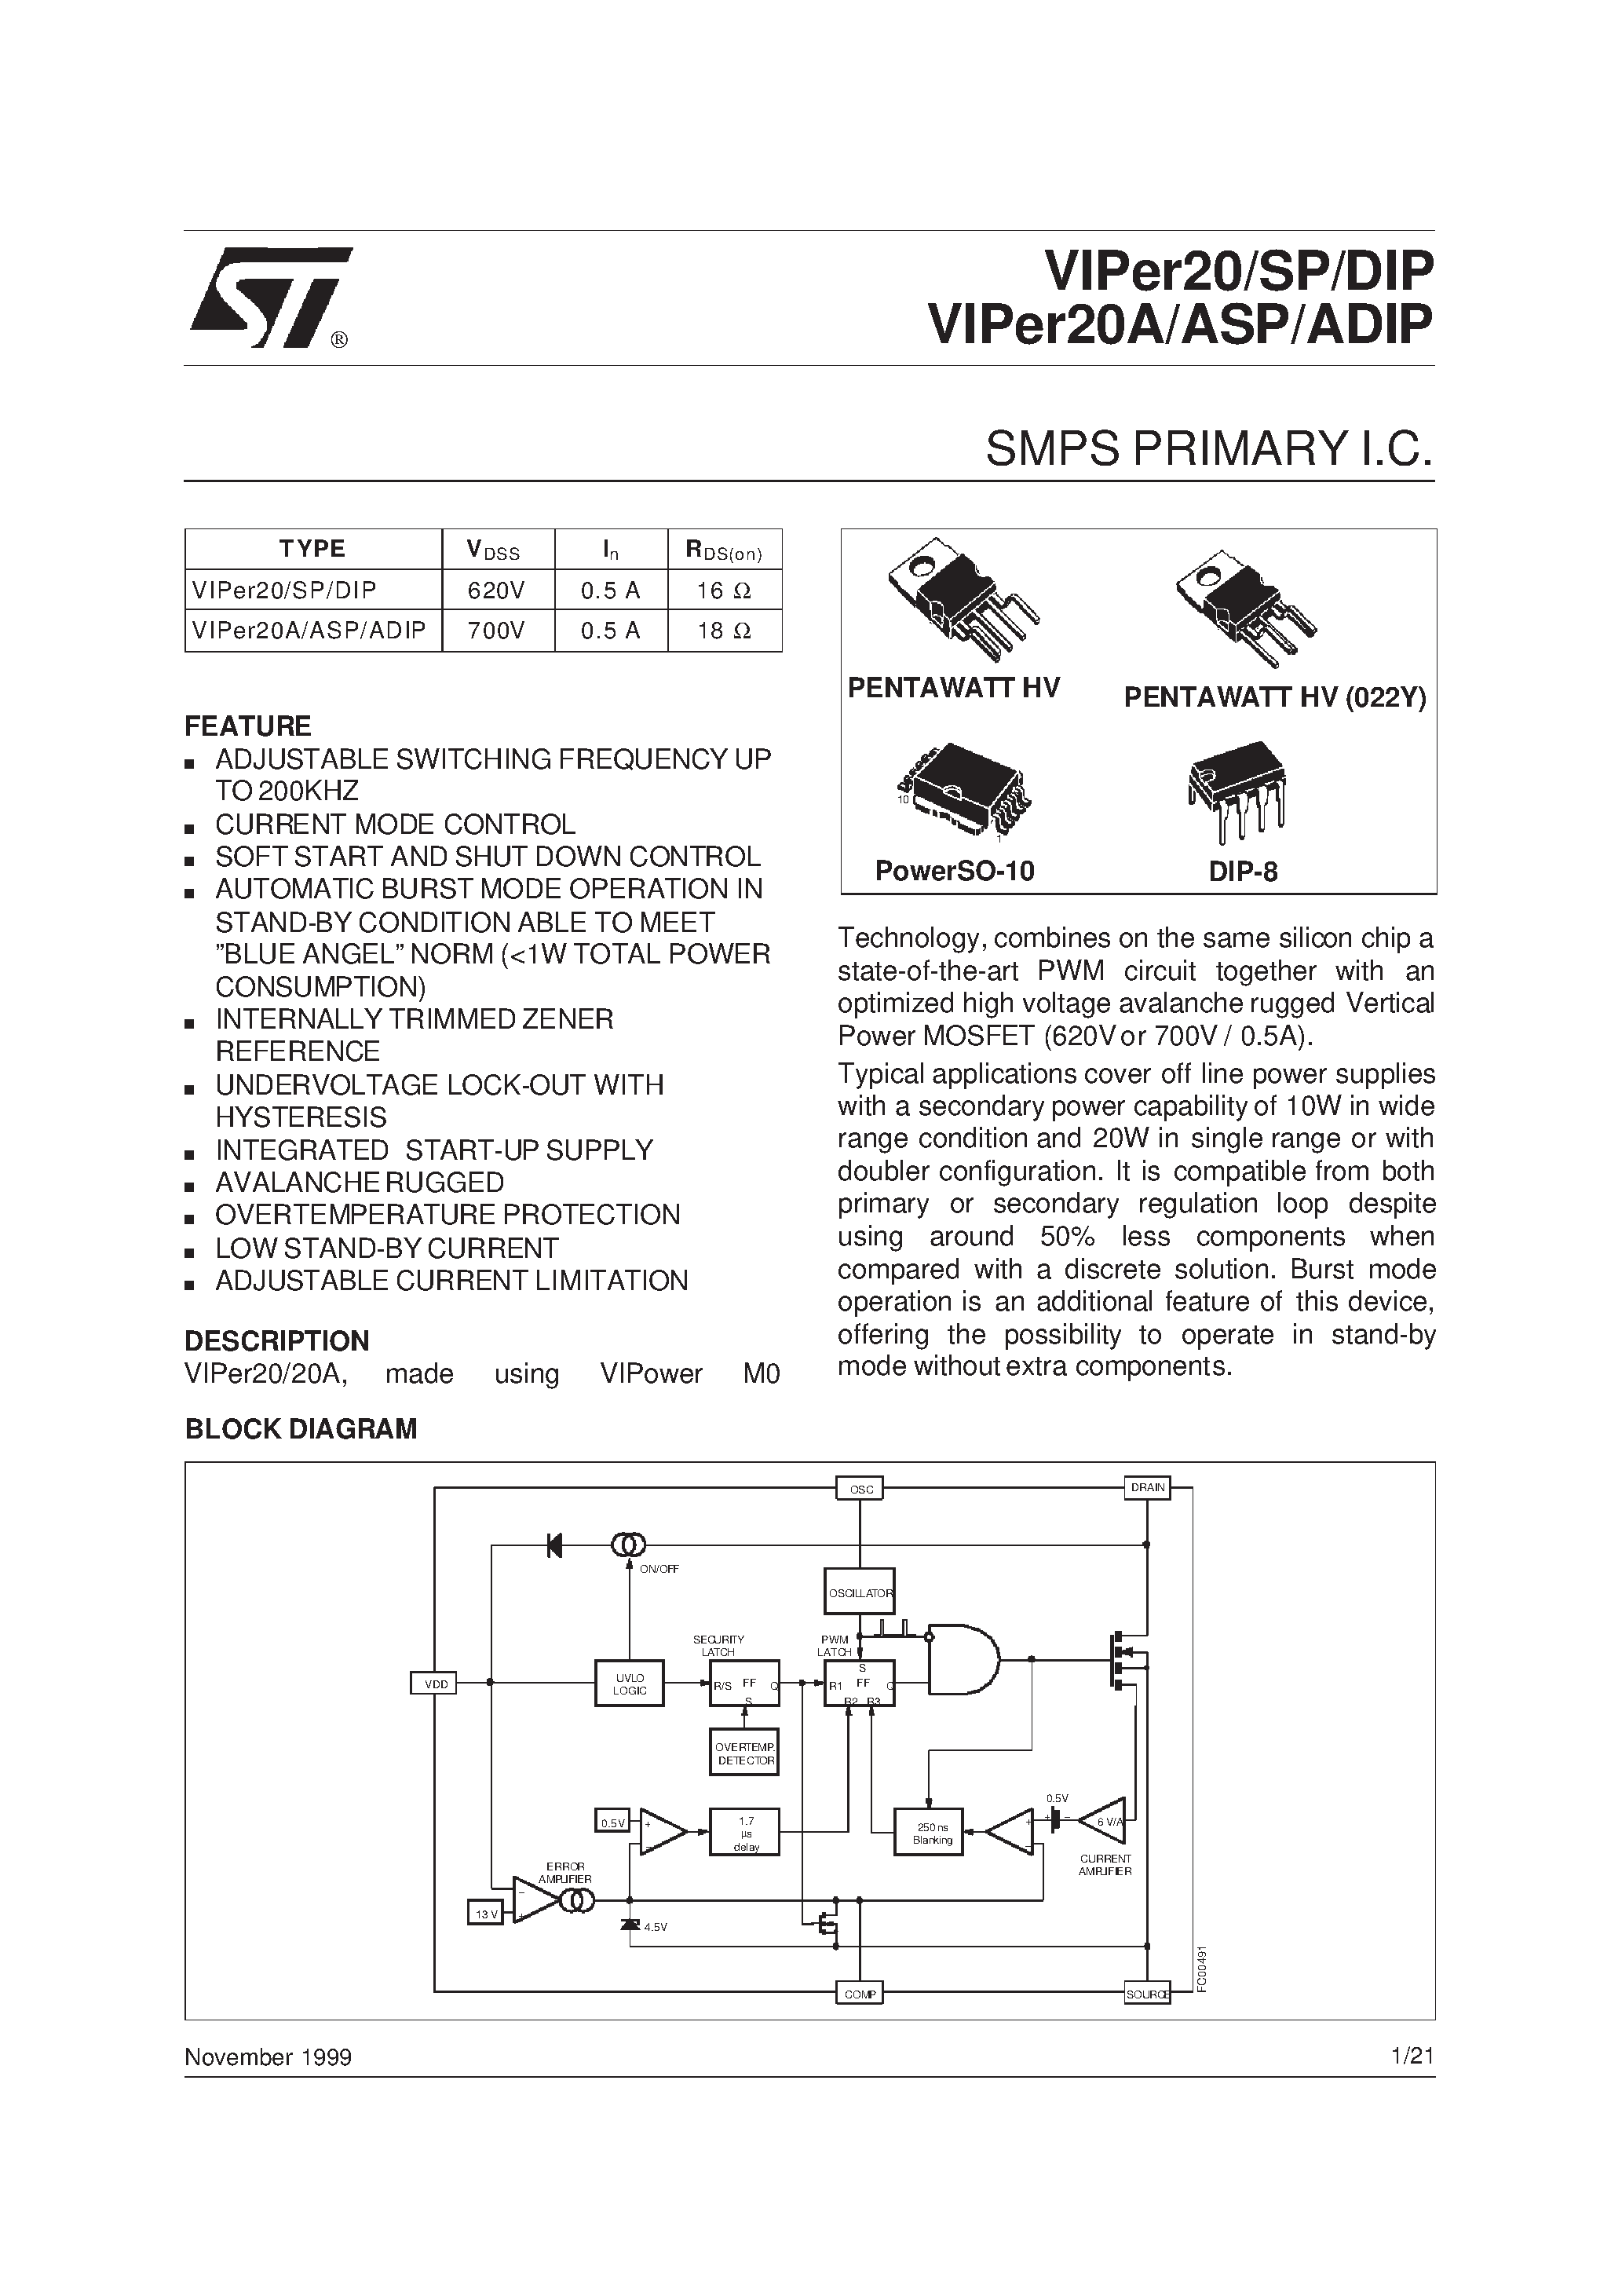 Datasheet VIPer20DIP - SMPS PRIMARY I.C. page 1